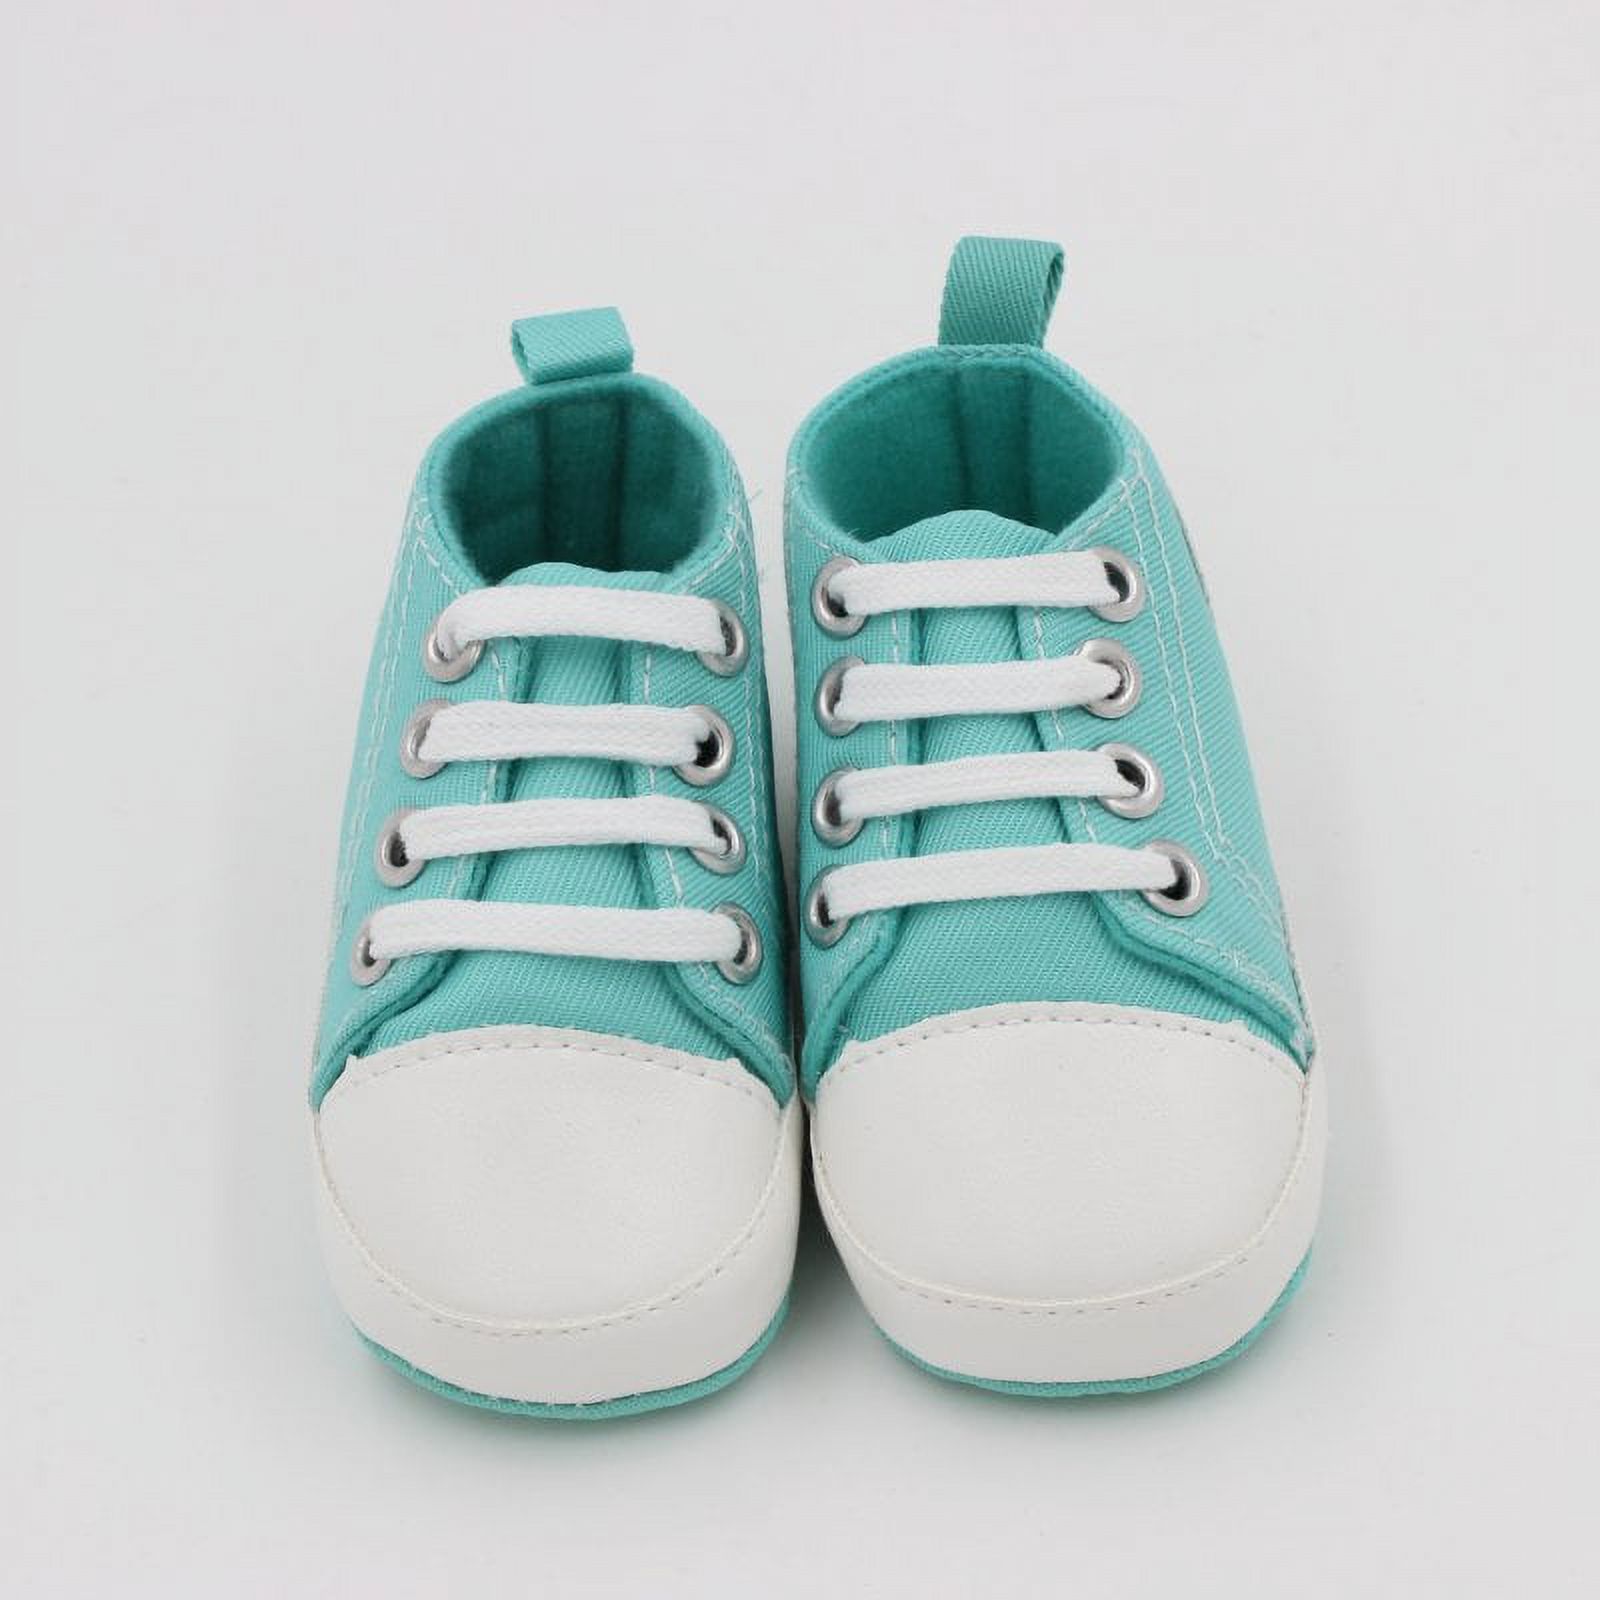 Infant Baby Girls Boys Canvas Shoes Soft Sole Toddler Slip On Newborn Crib Moccasins Casual Sneaker First Walkers Skate Shoe - image 3 of 5